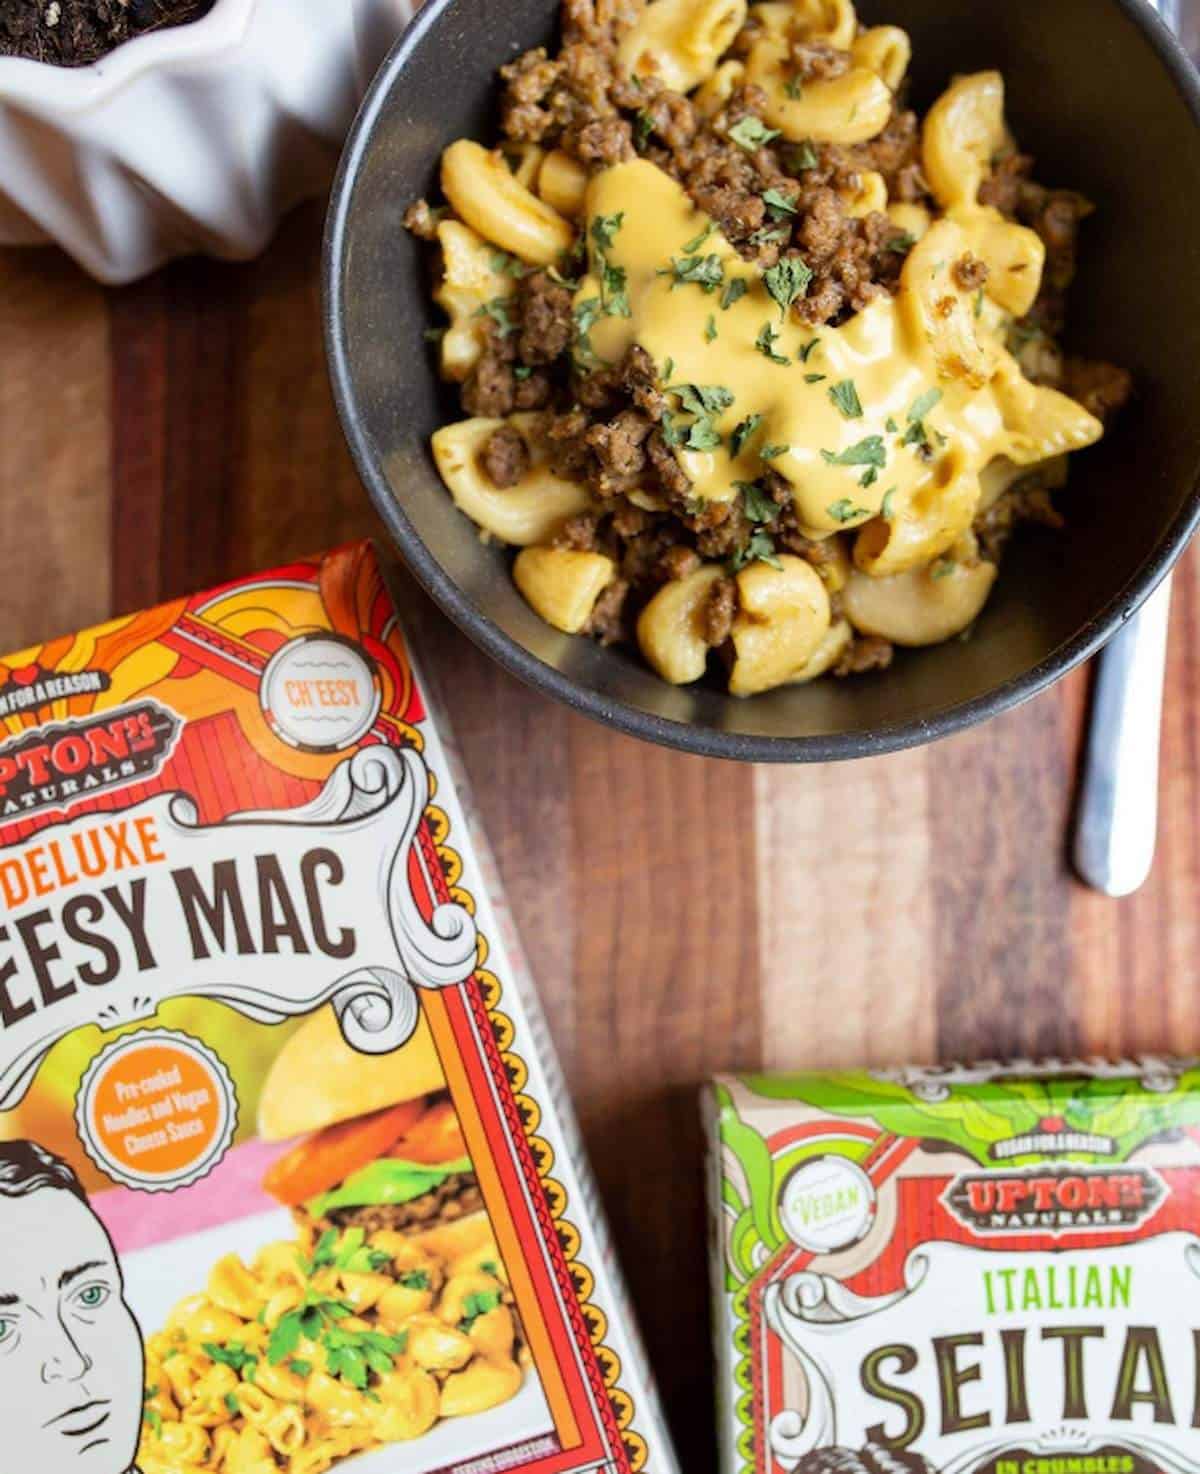 A bowl of Upton's Naturals deluxe cheesy mac topped with their Italian seitan crumbles.